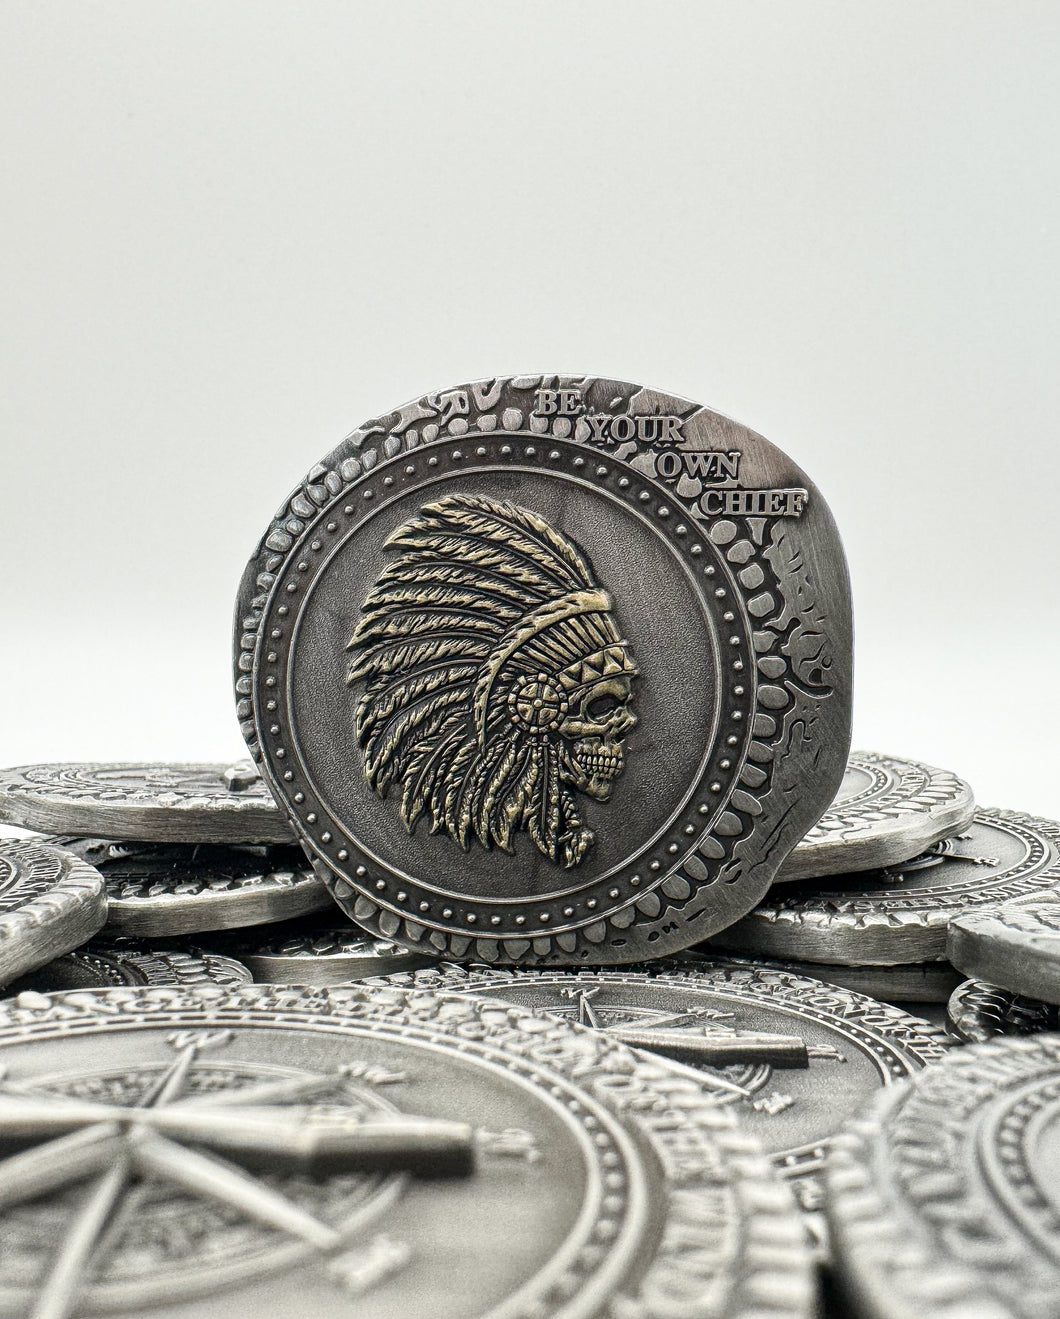 The Chief Coin